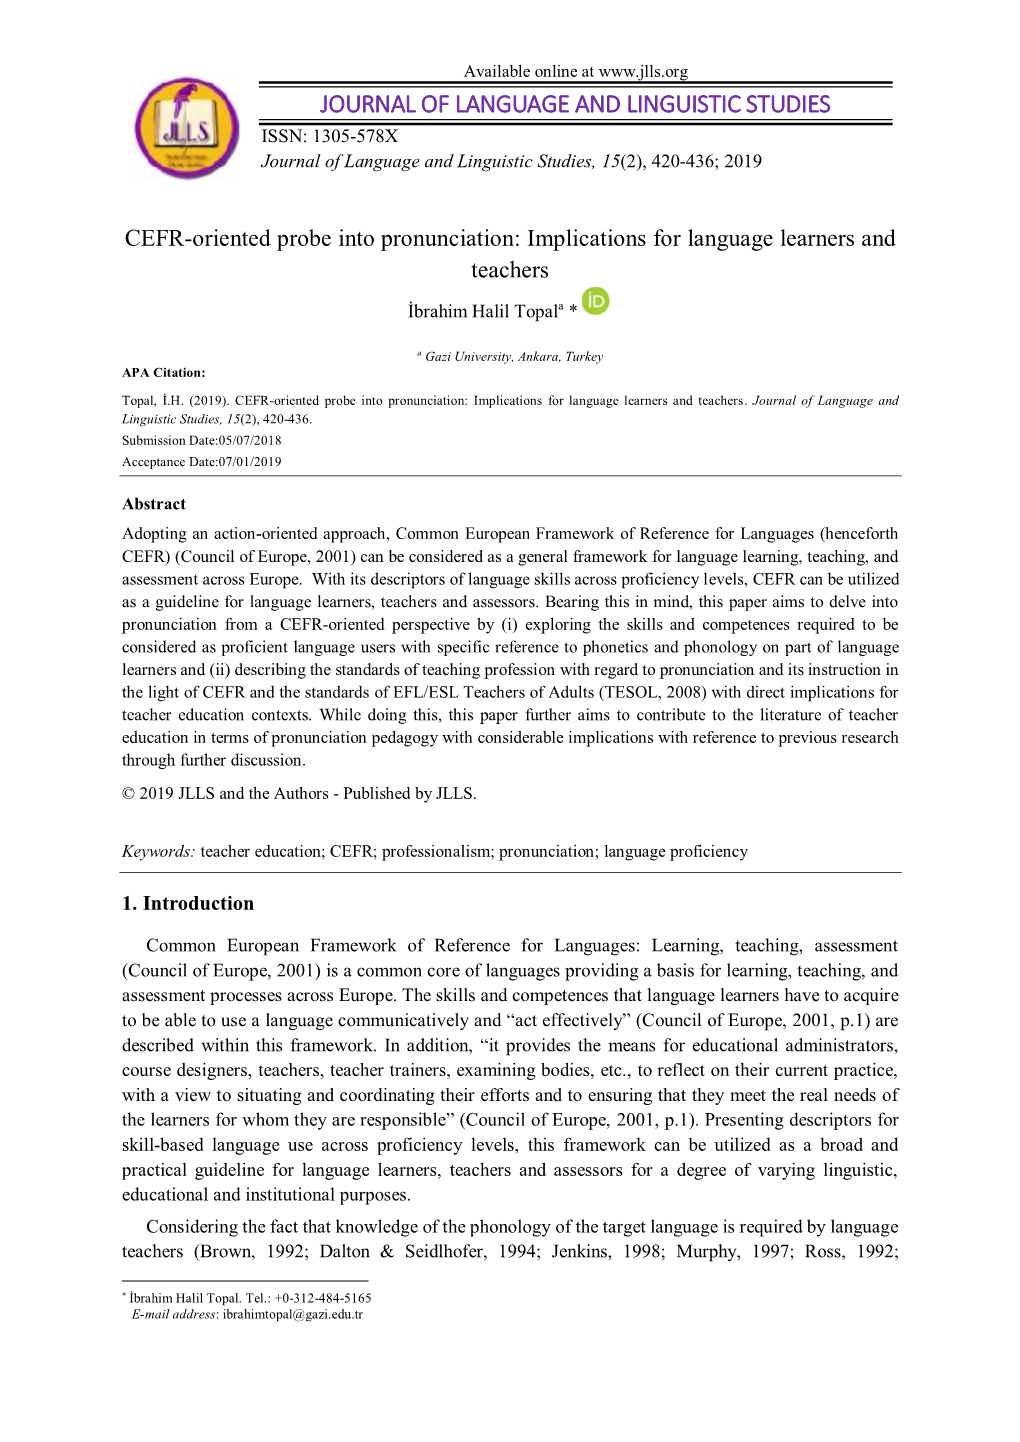 CEFR-Oriented Probe Into Pronunciation: Implications for Language Learners and Teachers